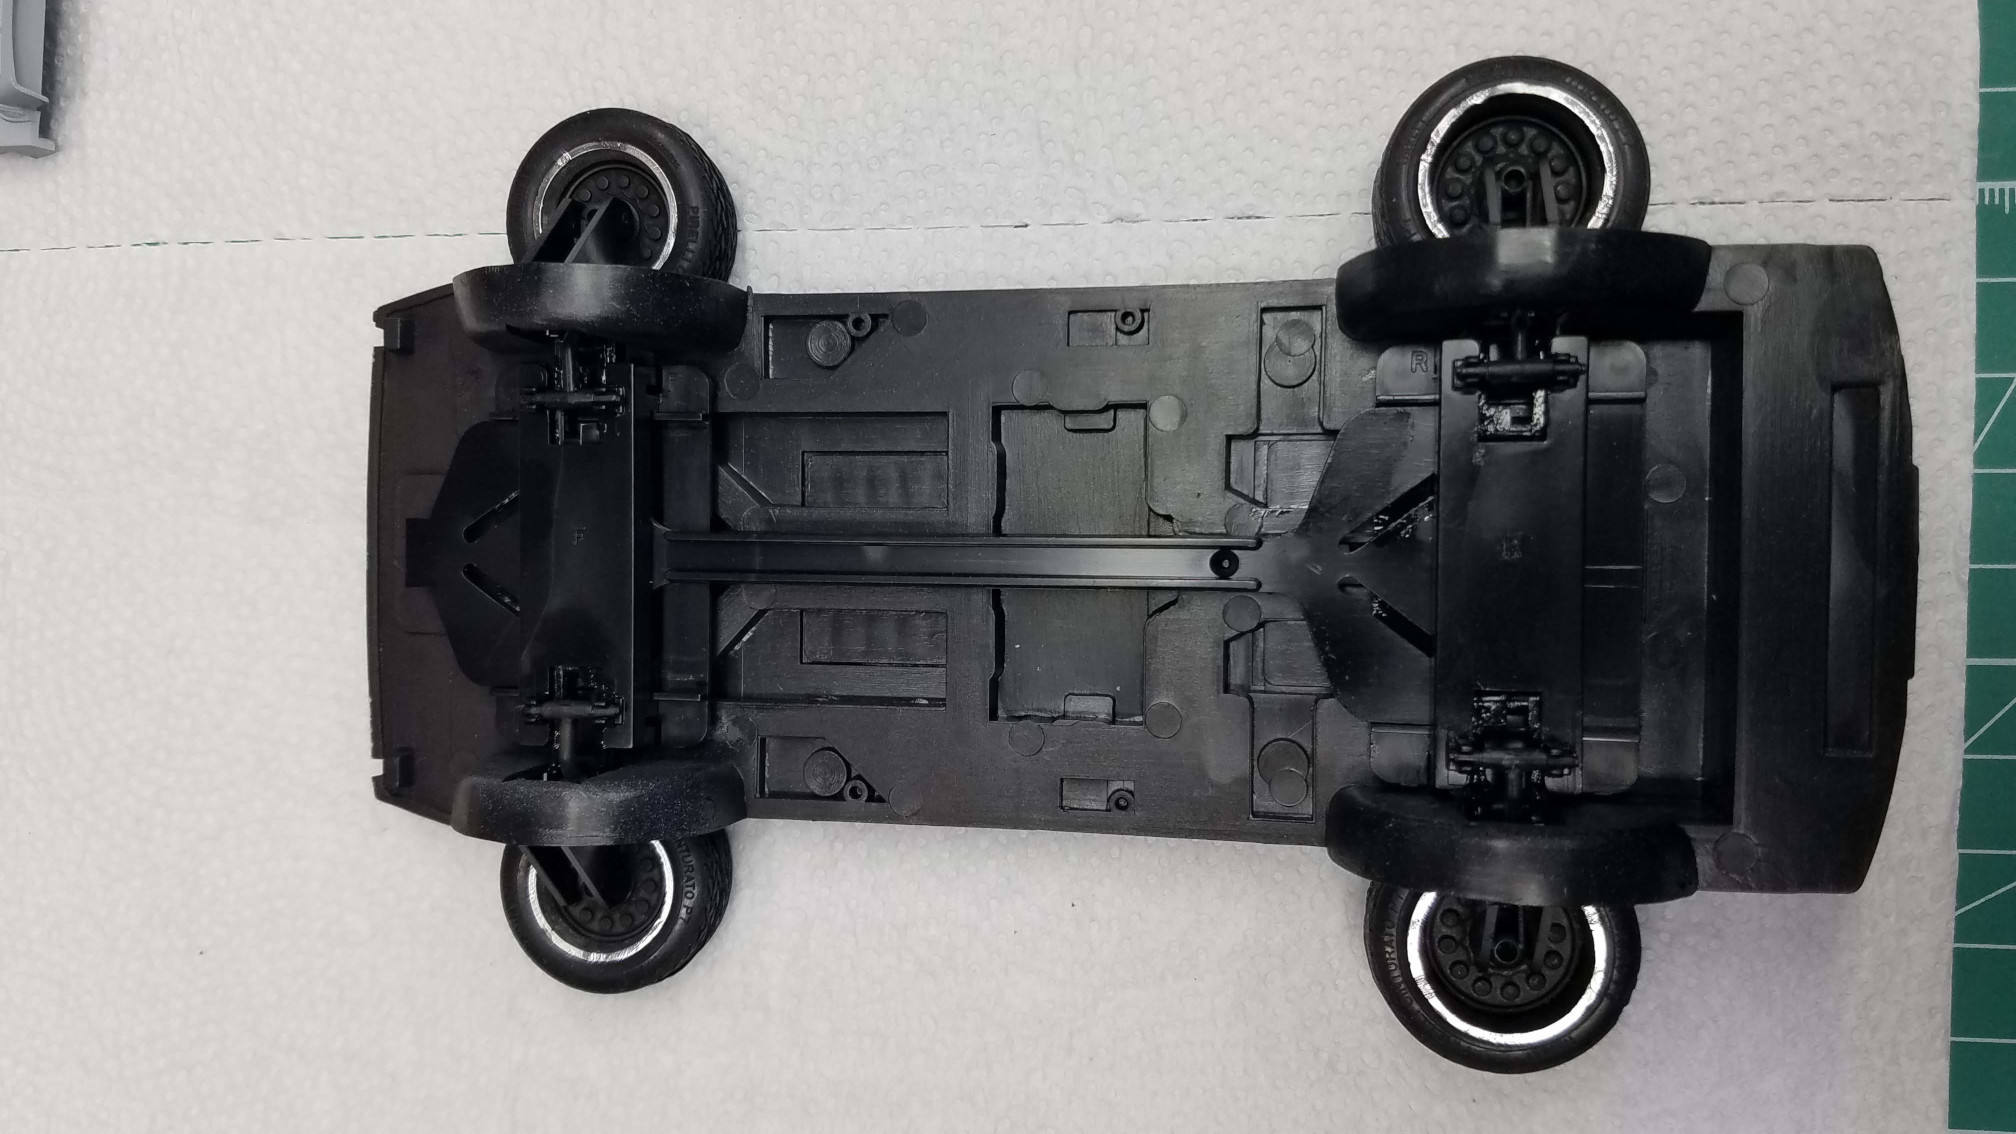 Top of Chassis with wheels in flying position